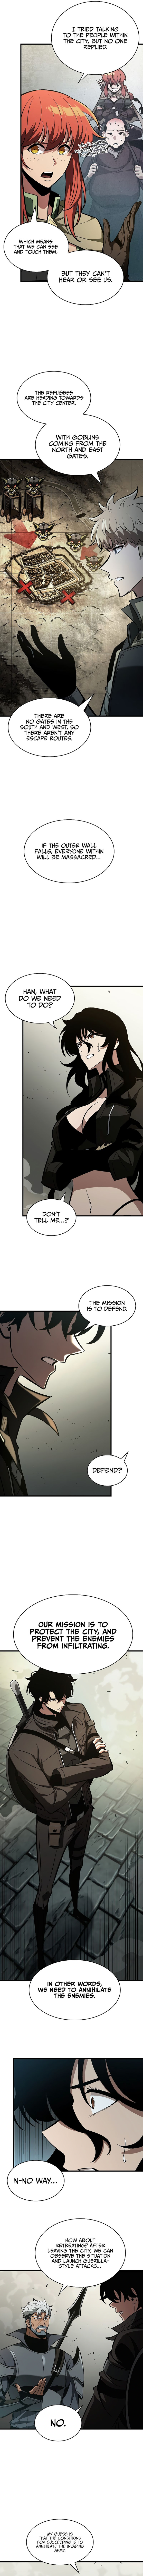 Pick Me Up Chapter 26 page 6